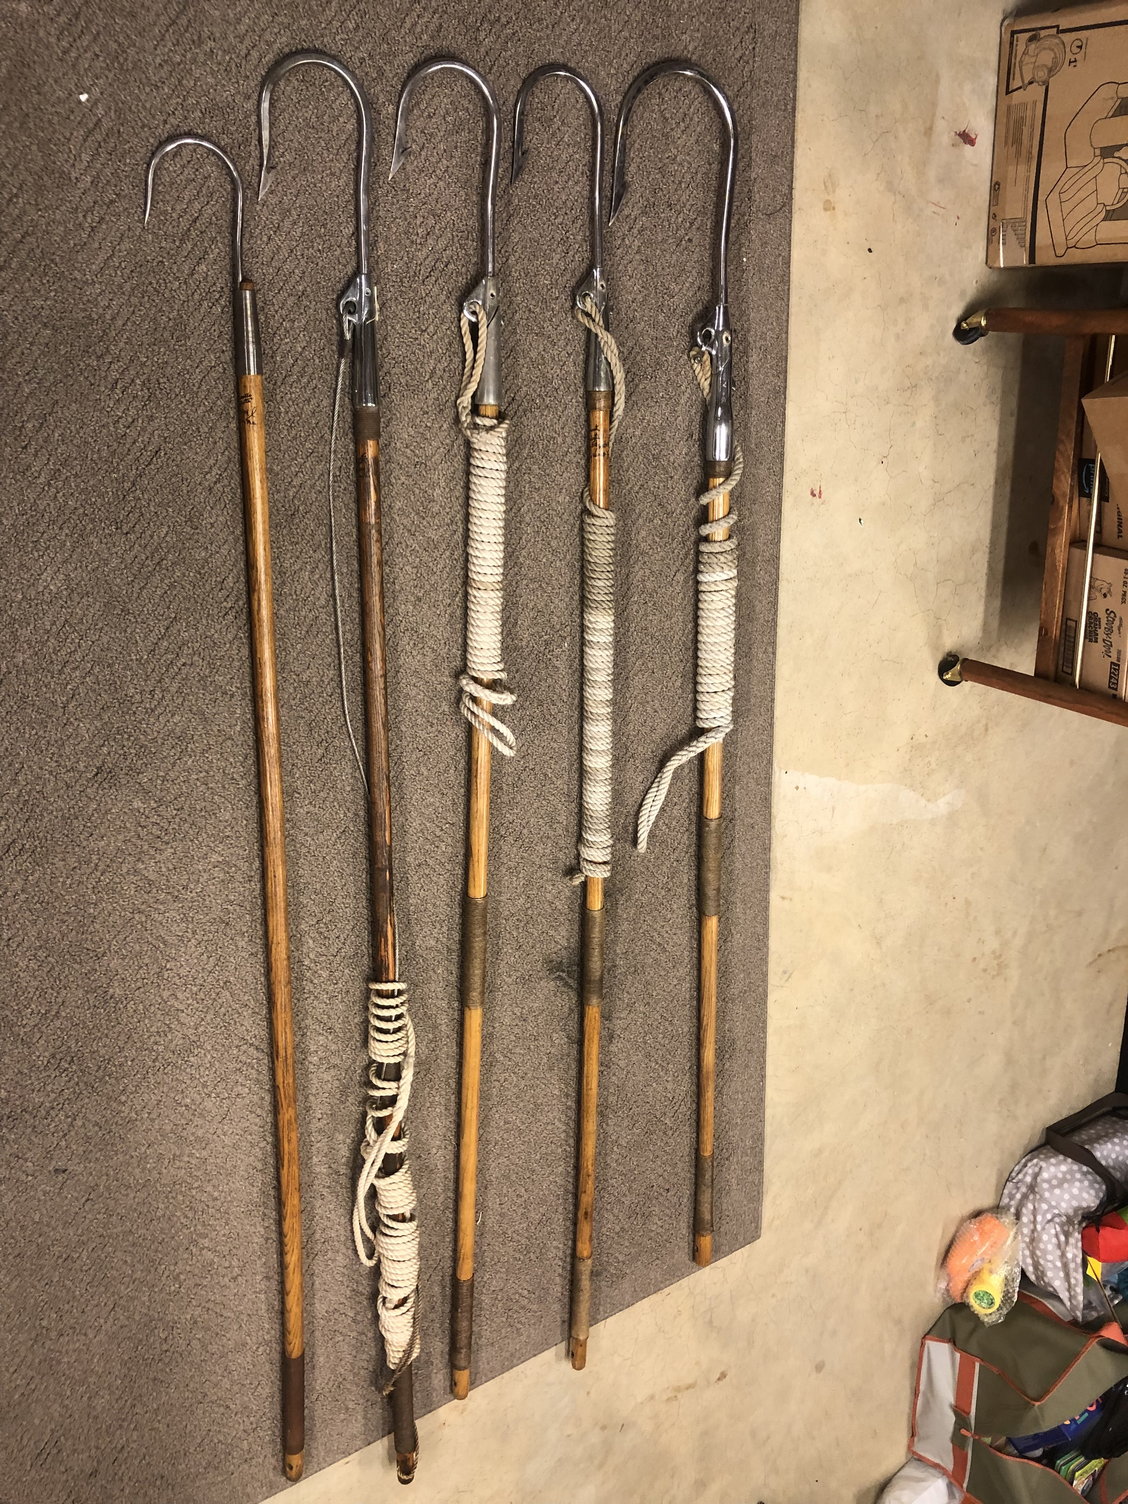 Vintage and Antique fishing gear - Page 2 - The Hull Truth - Boating and  Fishing Forum